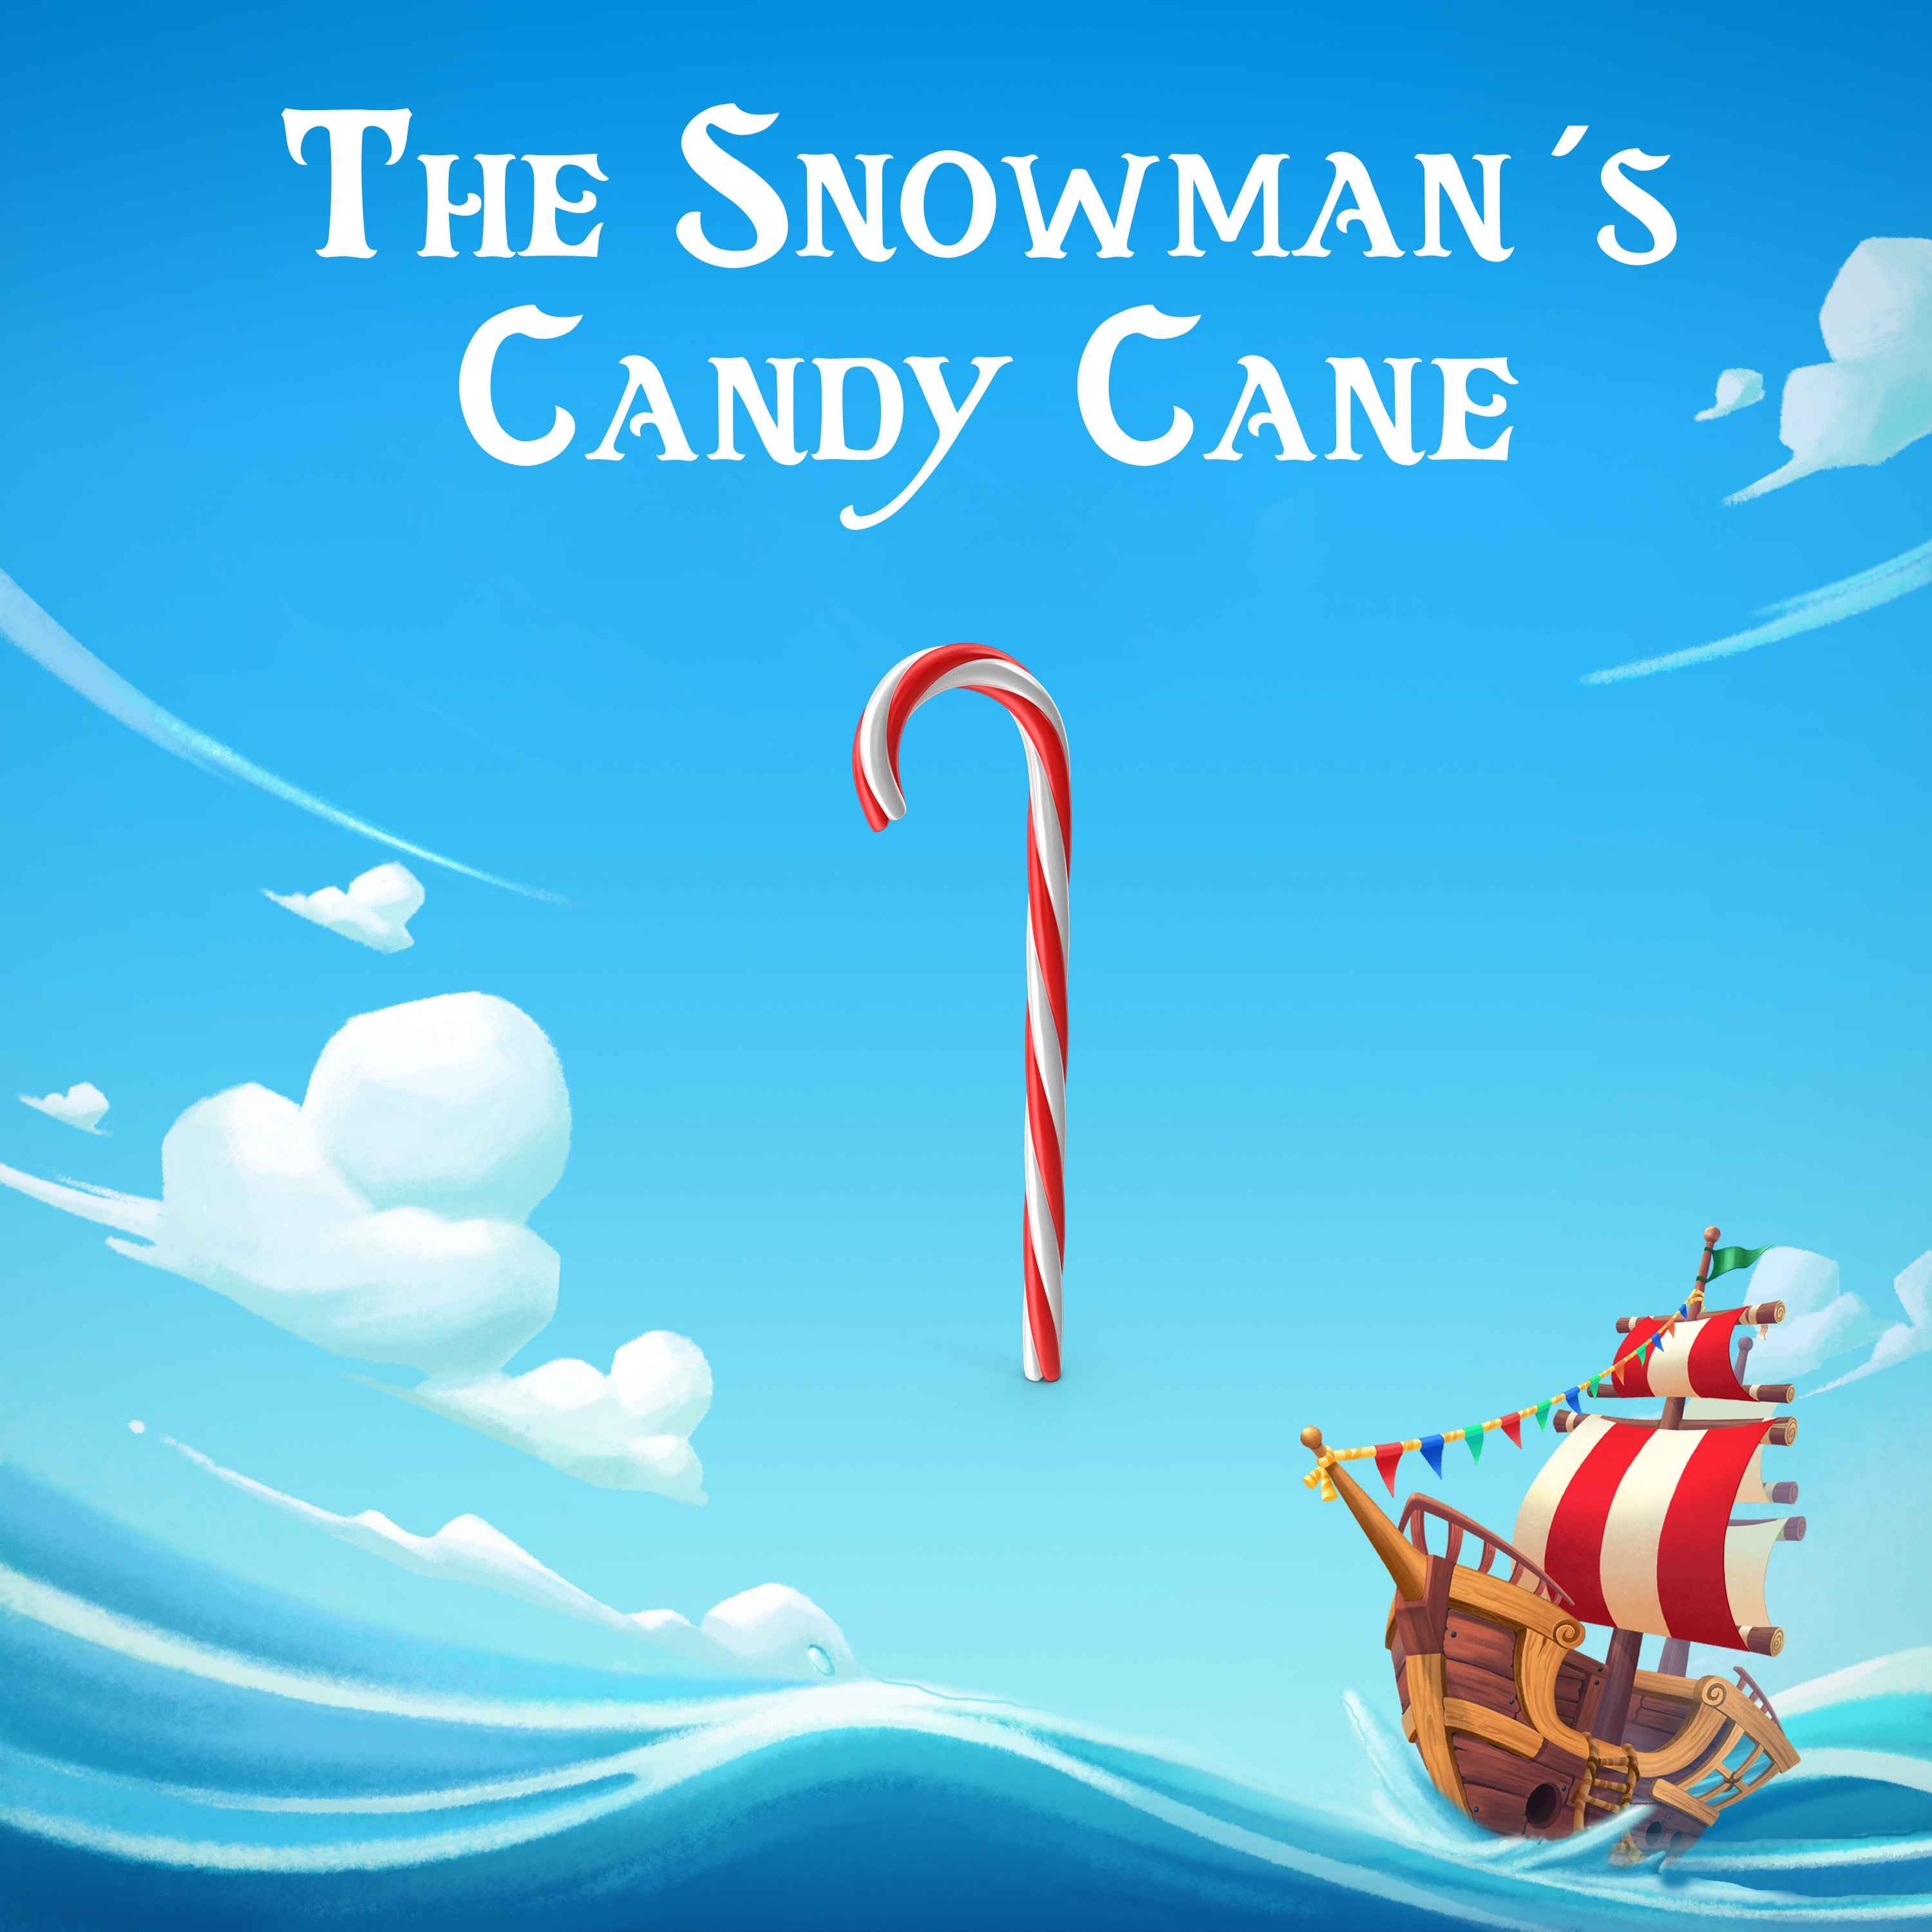 The Snowman's Candy Cane